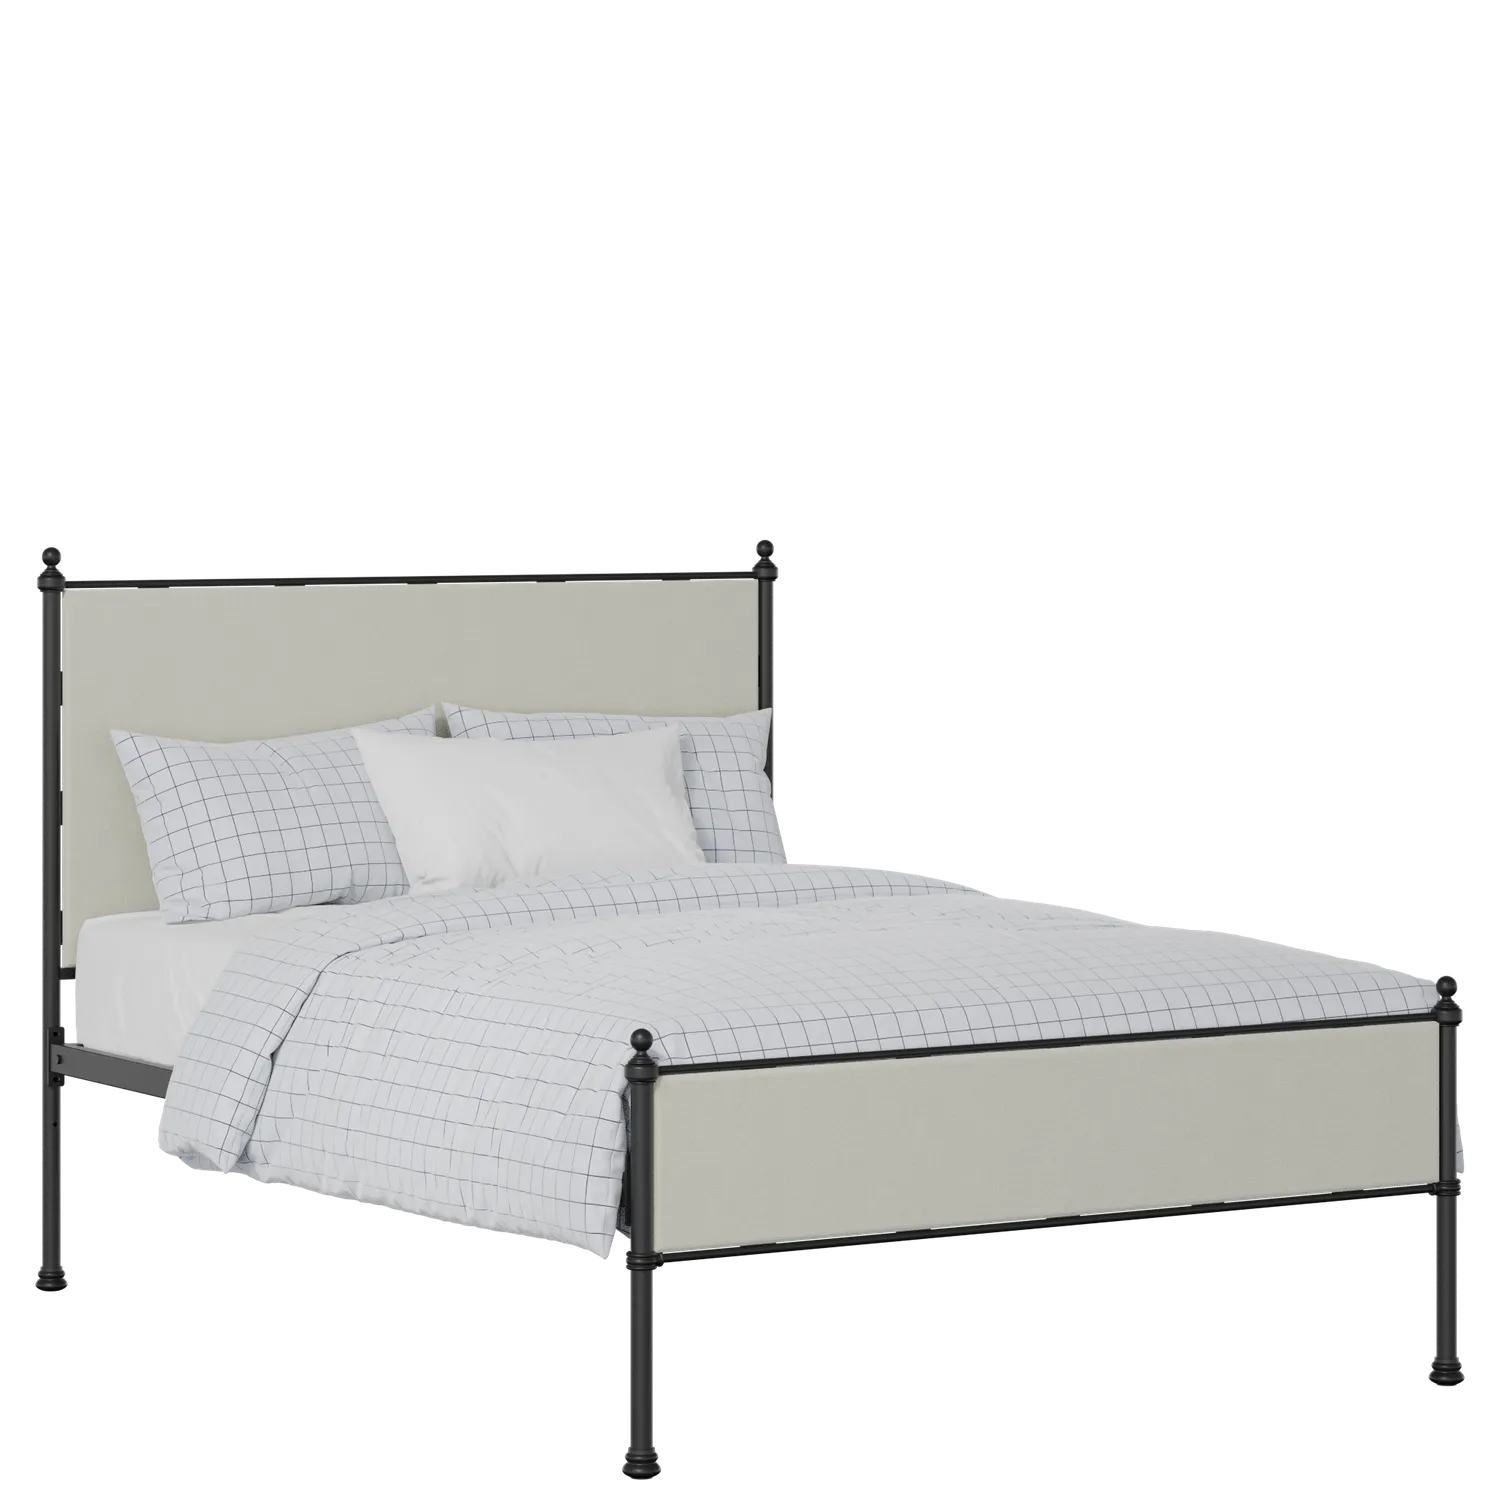 Neville Slim iron/metal upholstered bed in black with oatmeal fabric